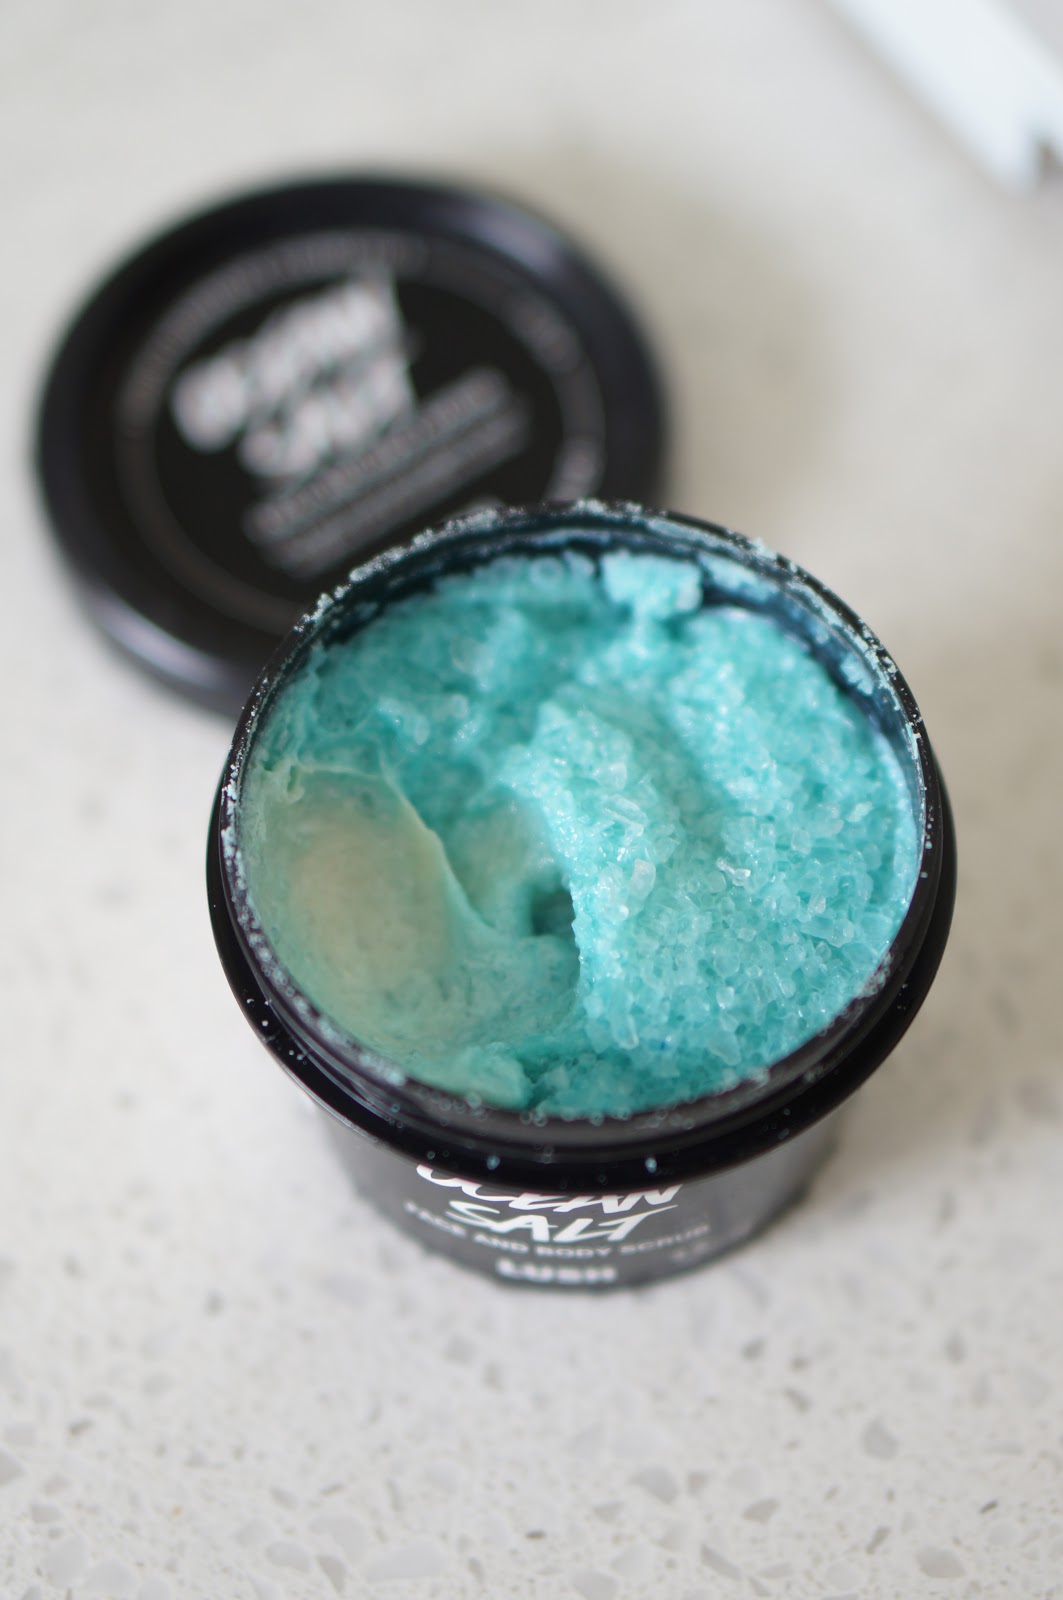 Rebecca Lately Favorite Lush Products Blue Skies and Fluffy White Clouds Bubble Bar MMMelting Marshmallow Moment Oil Sex Bomb Over and Over Bath Bomb Ocean Salt Scrub